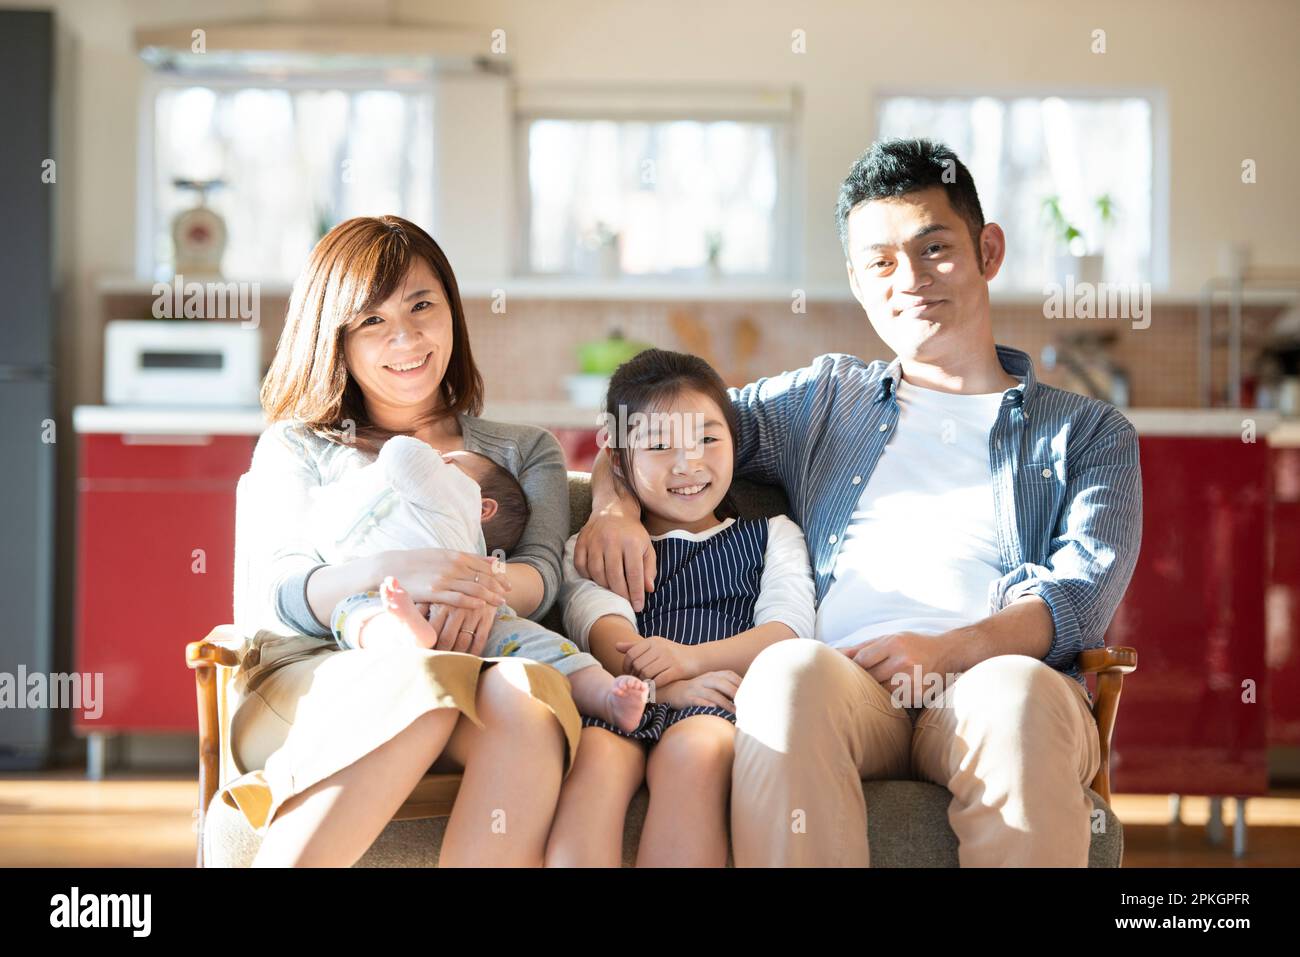 Family sitting on the sofa and smiling Stock Photo